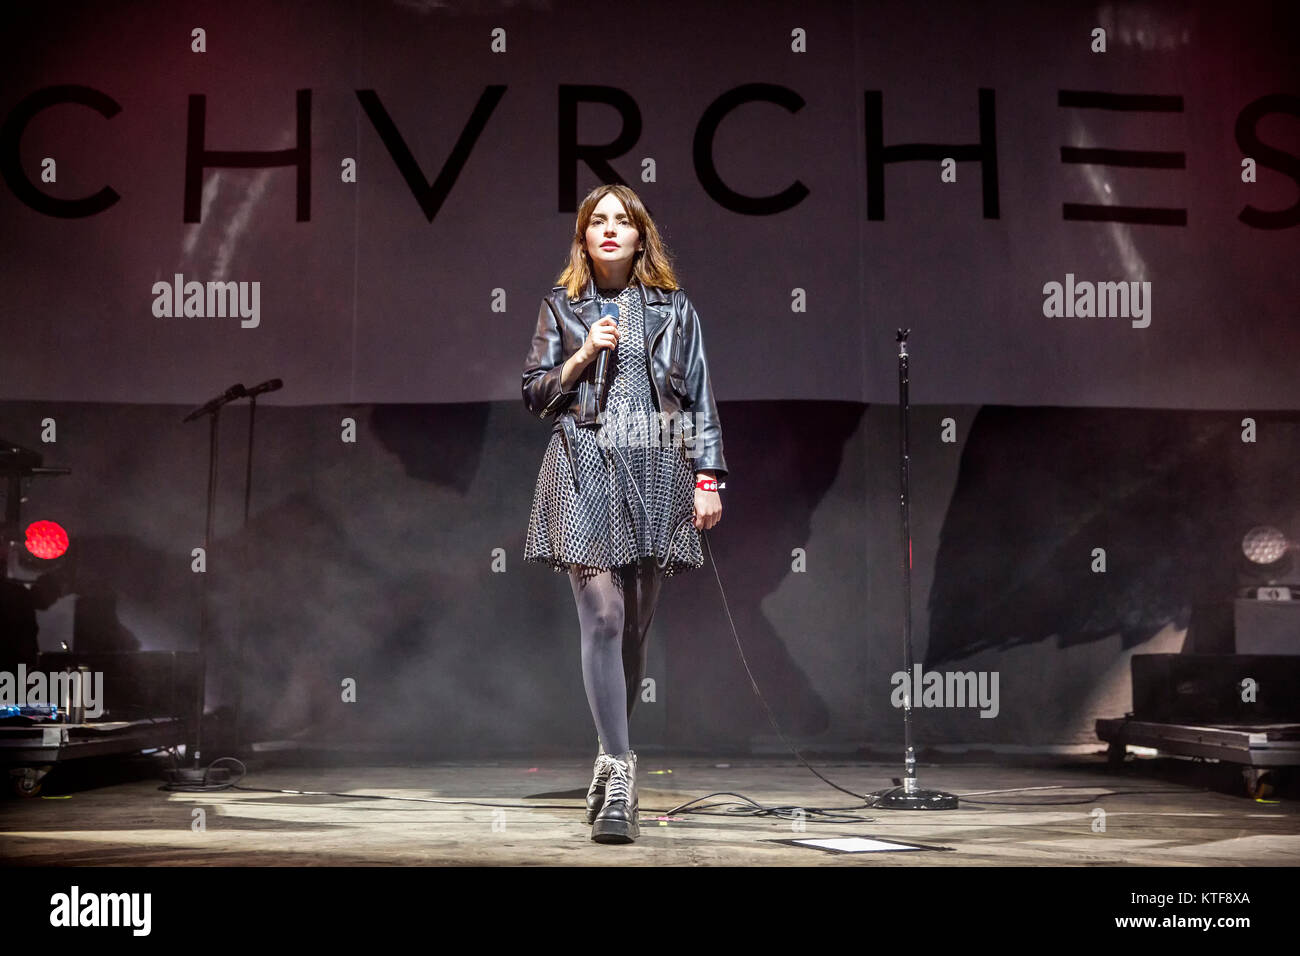 The Scottish electro- and synthpop band CHVRCHES (stylised as CHVRCHΞS) performs a live concert at the Norwegian music festival Øyafestivalen 2016 in Oslo. Here singer Lauren Mayberry is seen live on stage. Norway, 12/08 2016. Stock Photo